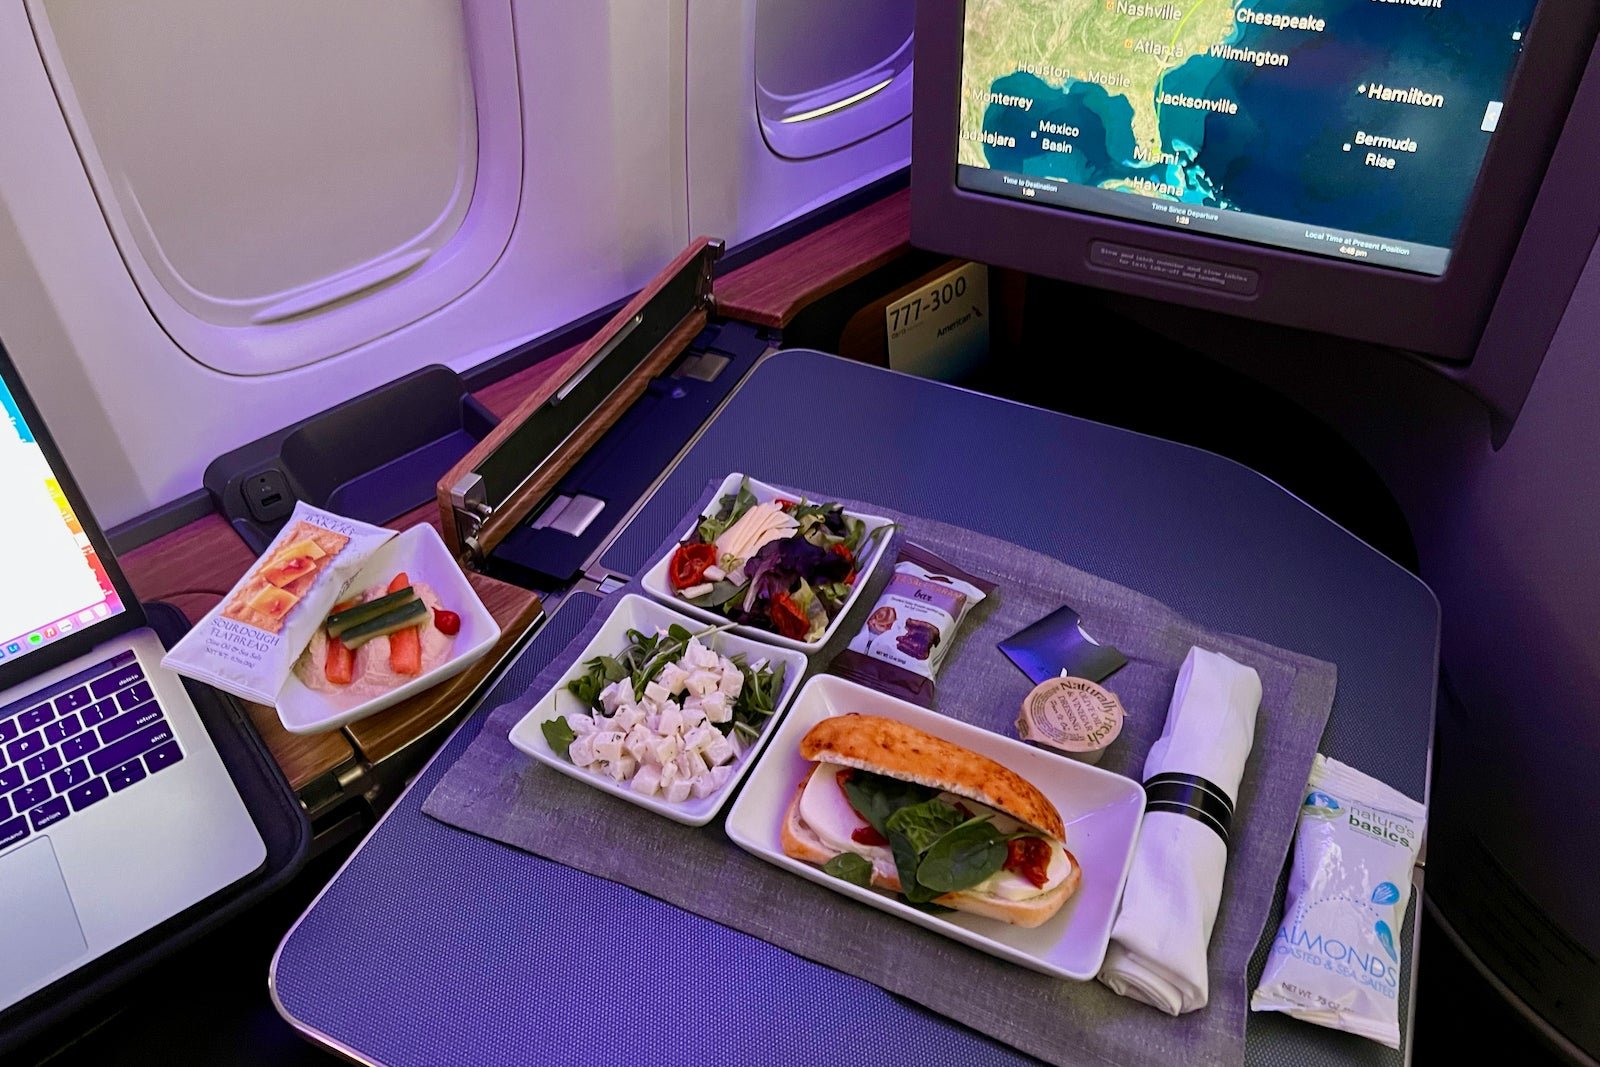 Inflight service is back — here’s what food and drinks you can expect on your next flight